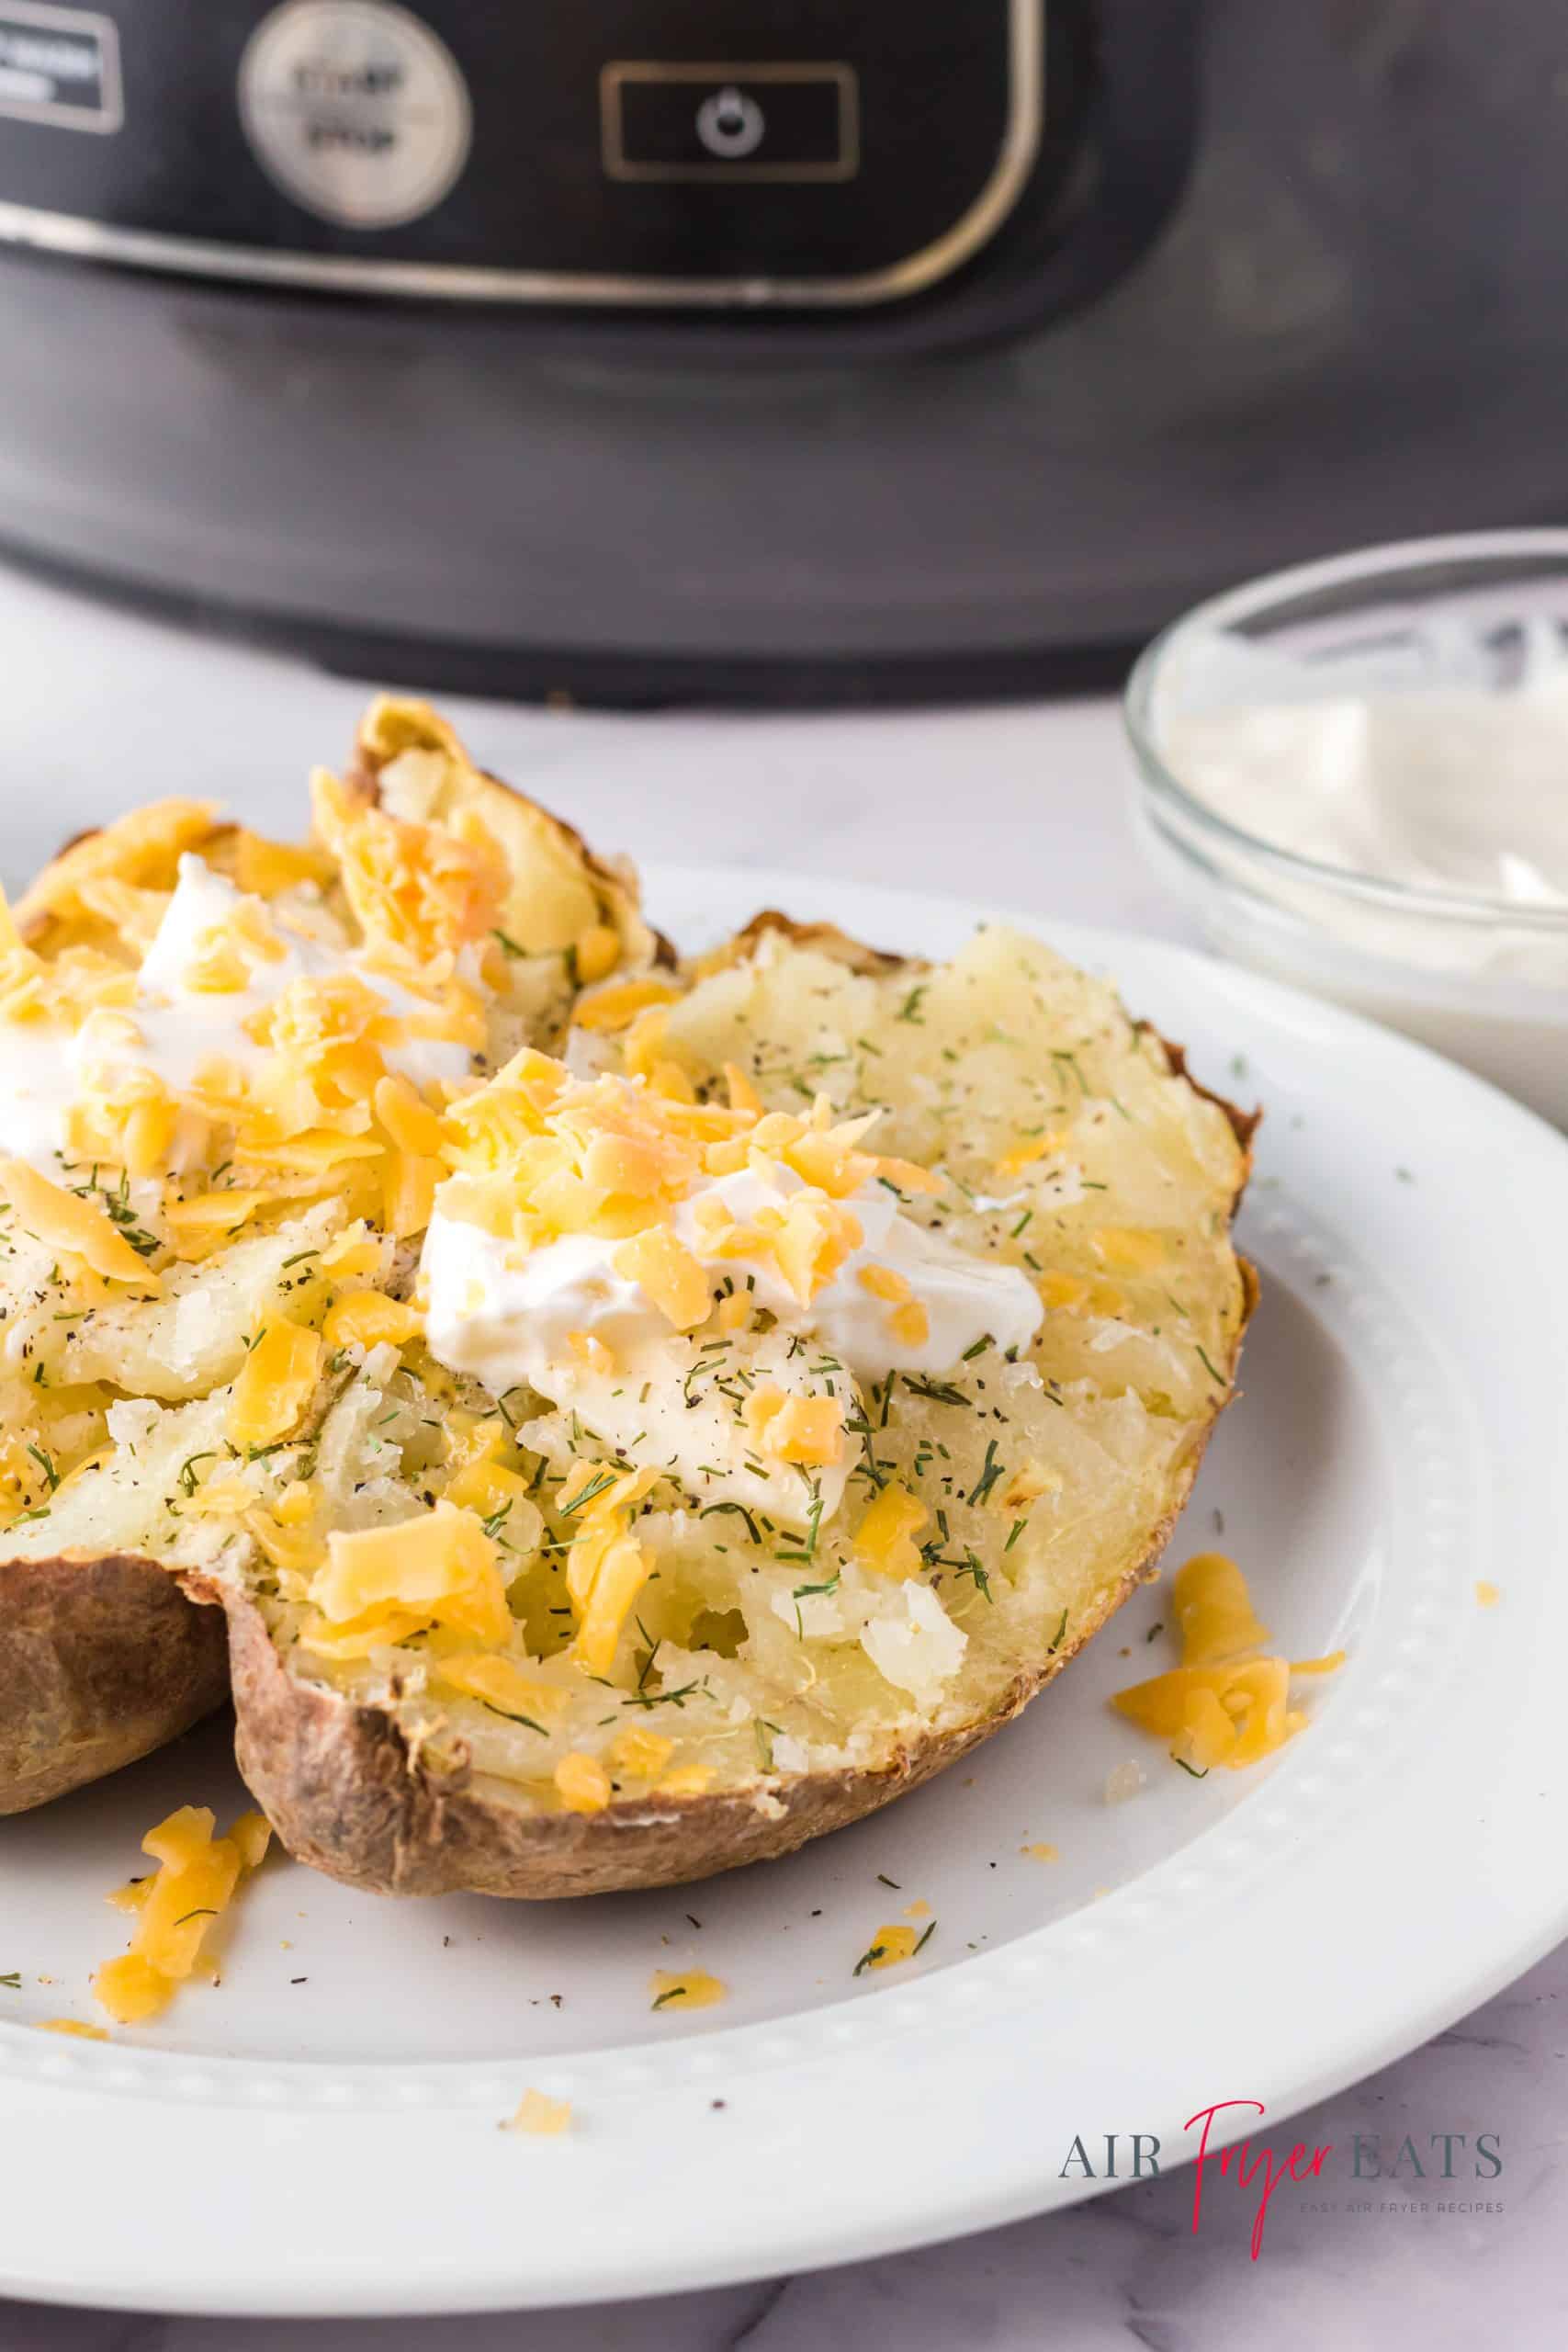 a split baked potato on a white plate, sitting in front of a ninja foodi. The potato is topped with sour cream, cheese, and seasonings